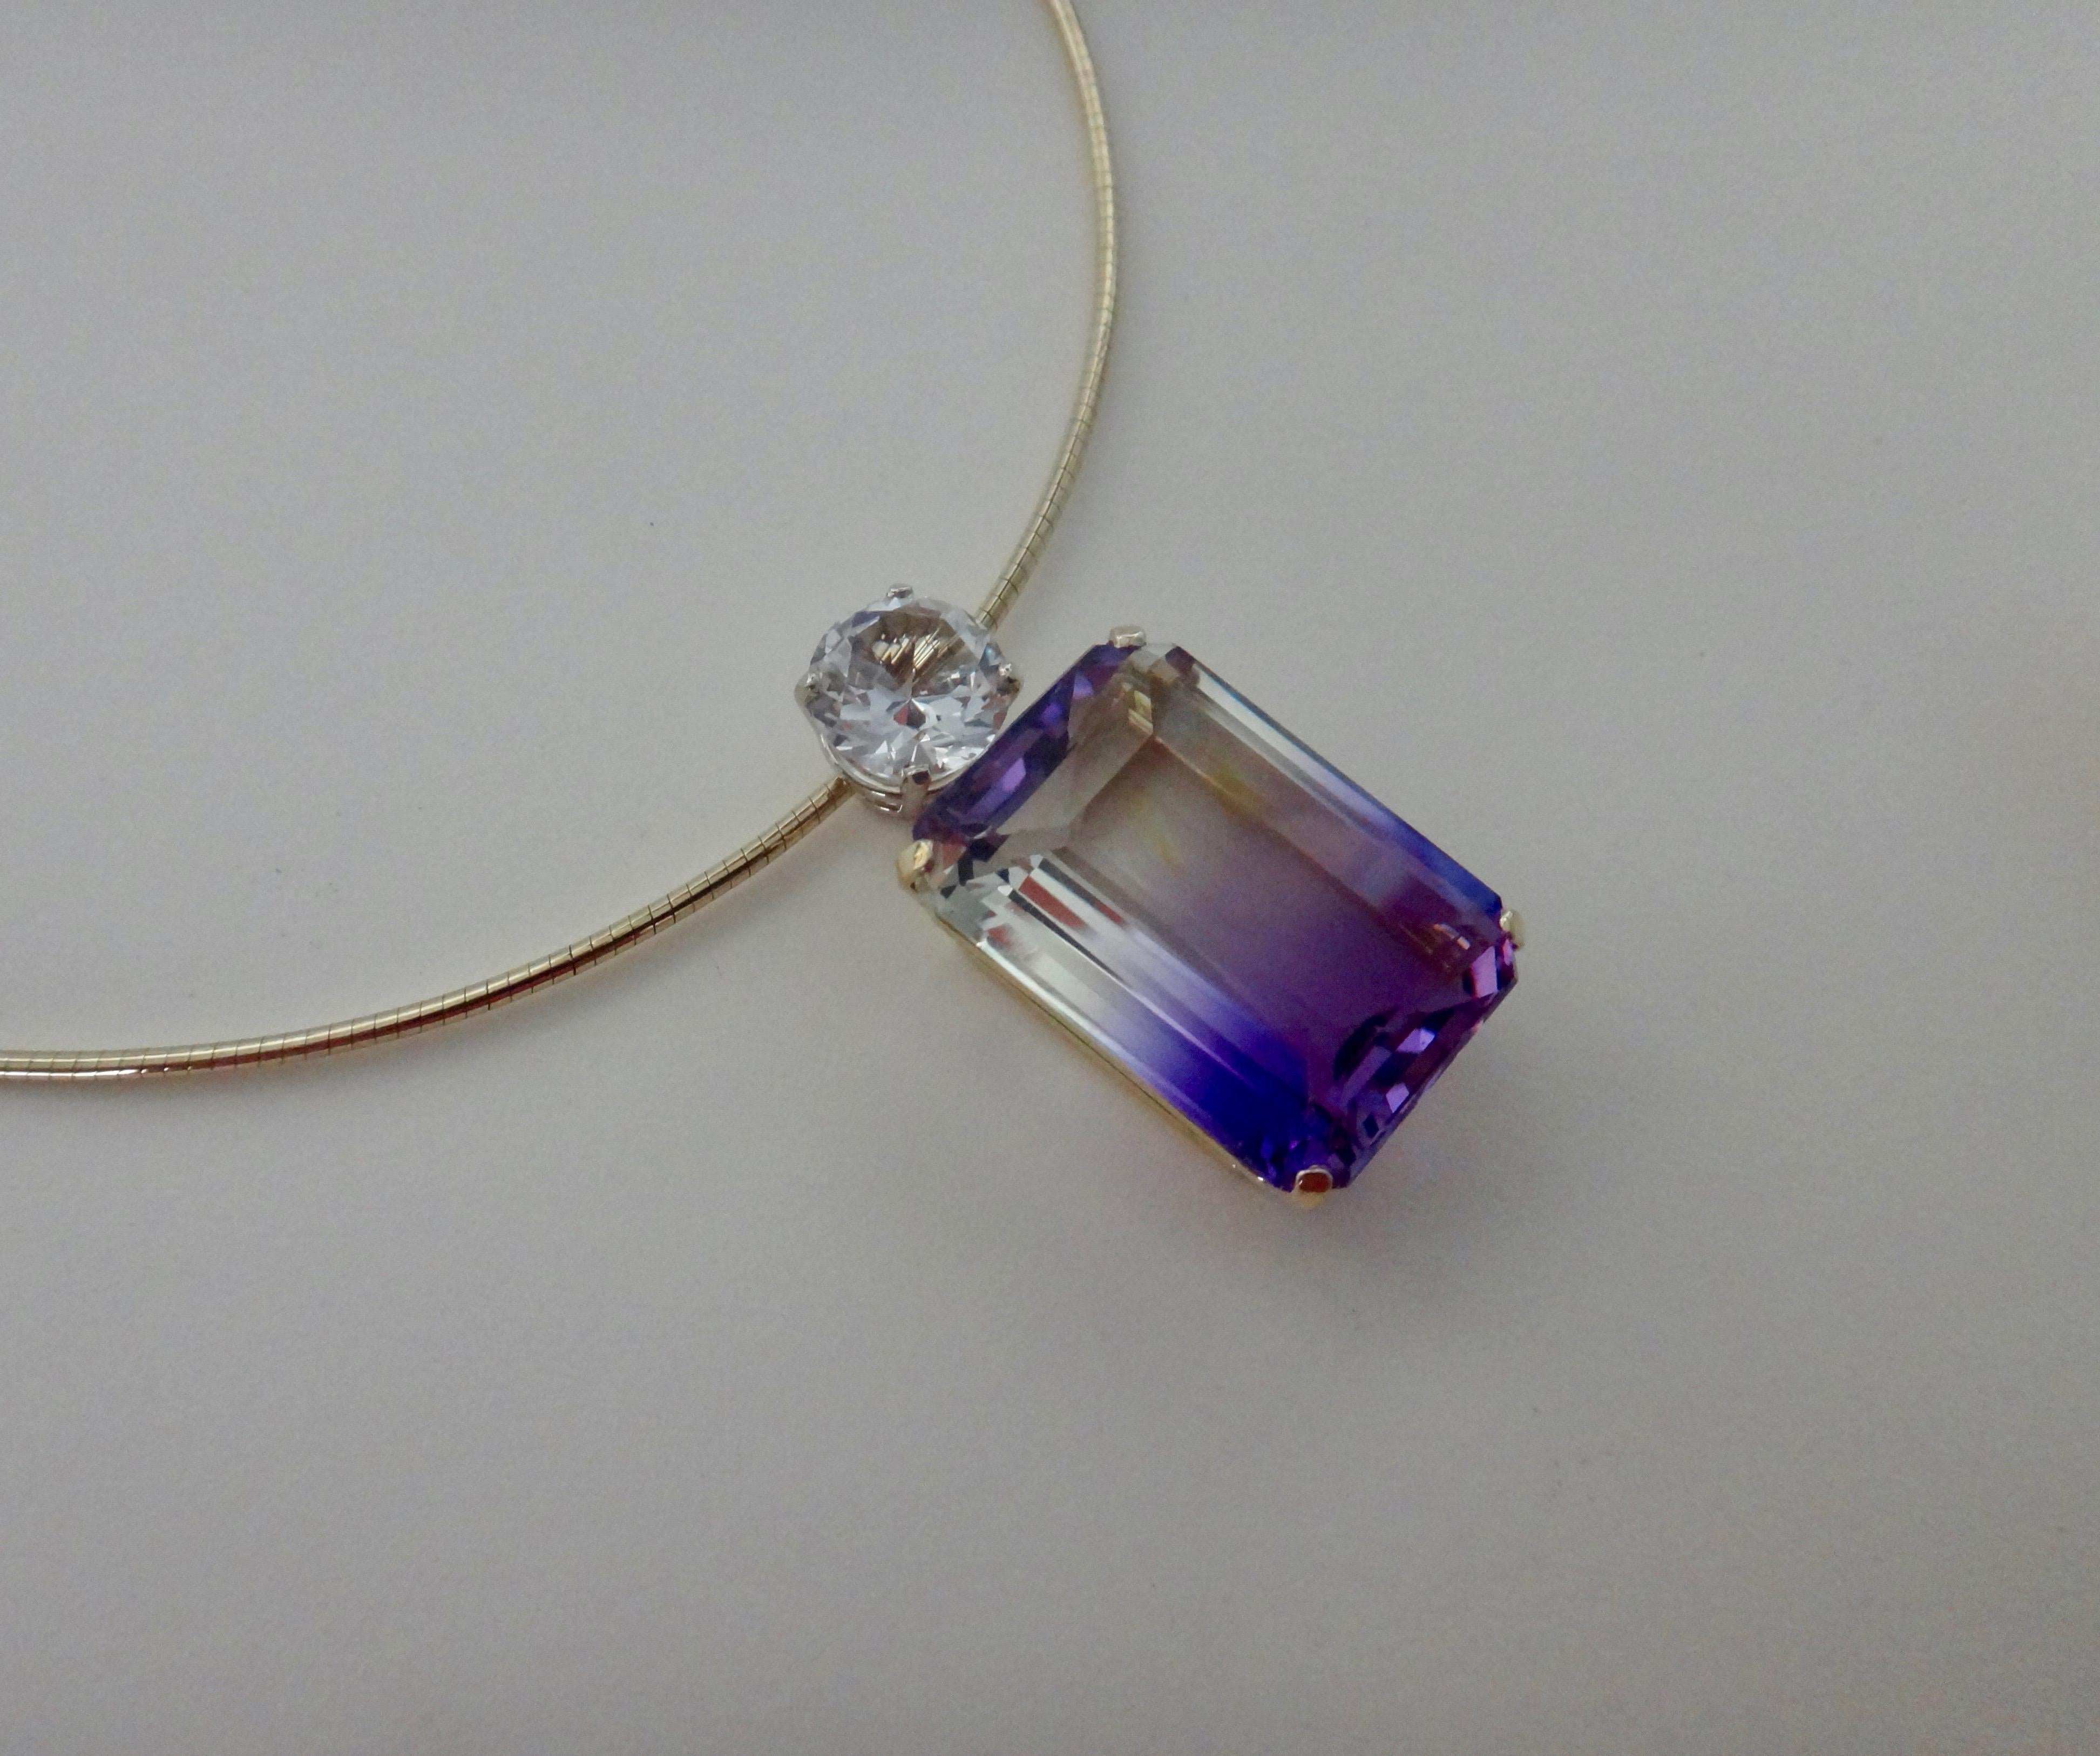 An emerald cut ametrine (origin: Bolivia) of 35 carats is the featured attraction in this one-of-a-kind pendant.  The gem is unusual in that it's purple and clear rather than the more common purple and gold.  The ametrine is well cut, well polished